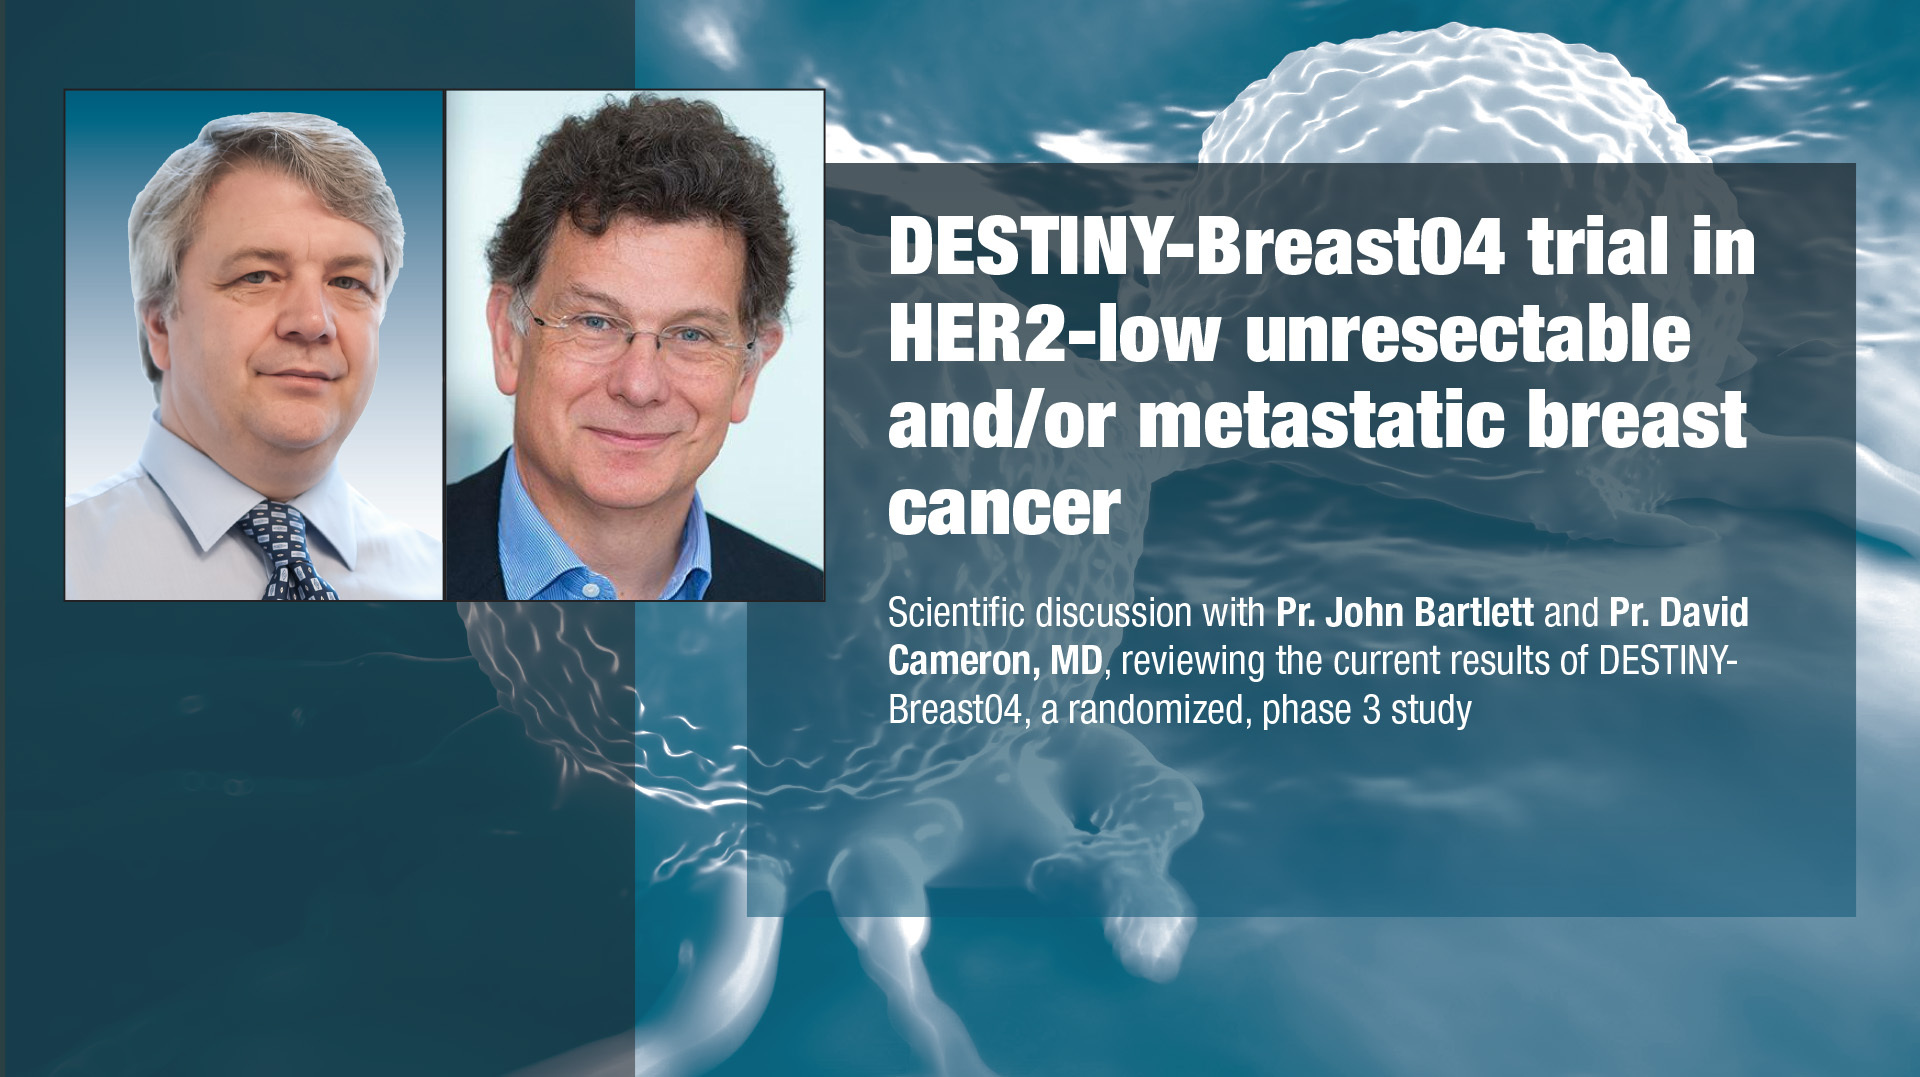 DESTINY-Breast04 trial in HER2-low unresectable and/or metastatic breast cancer